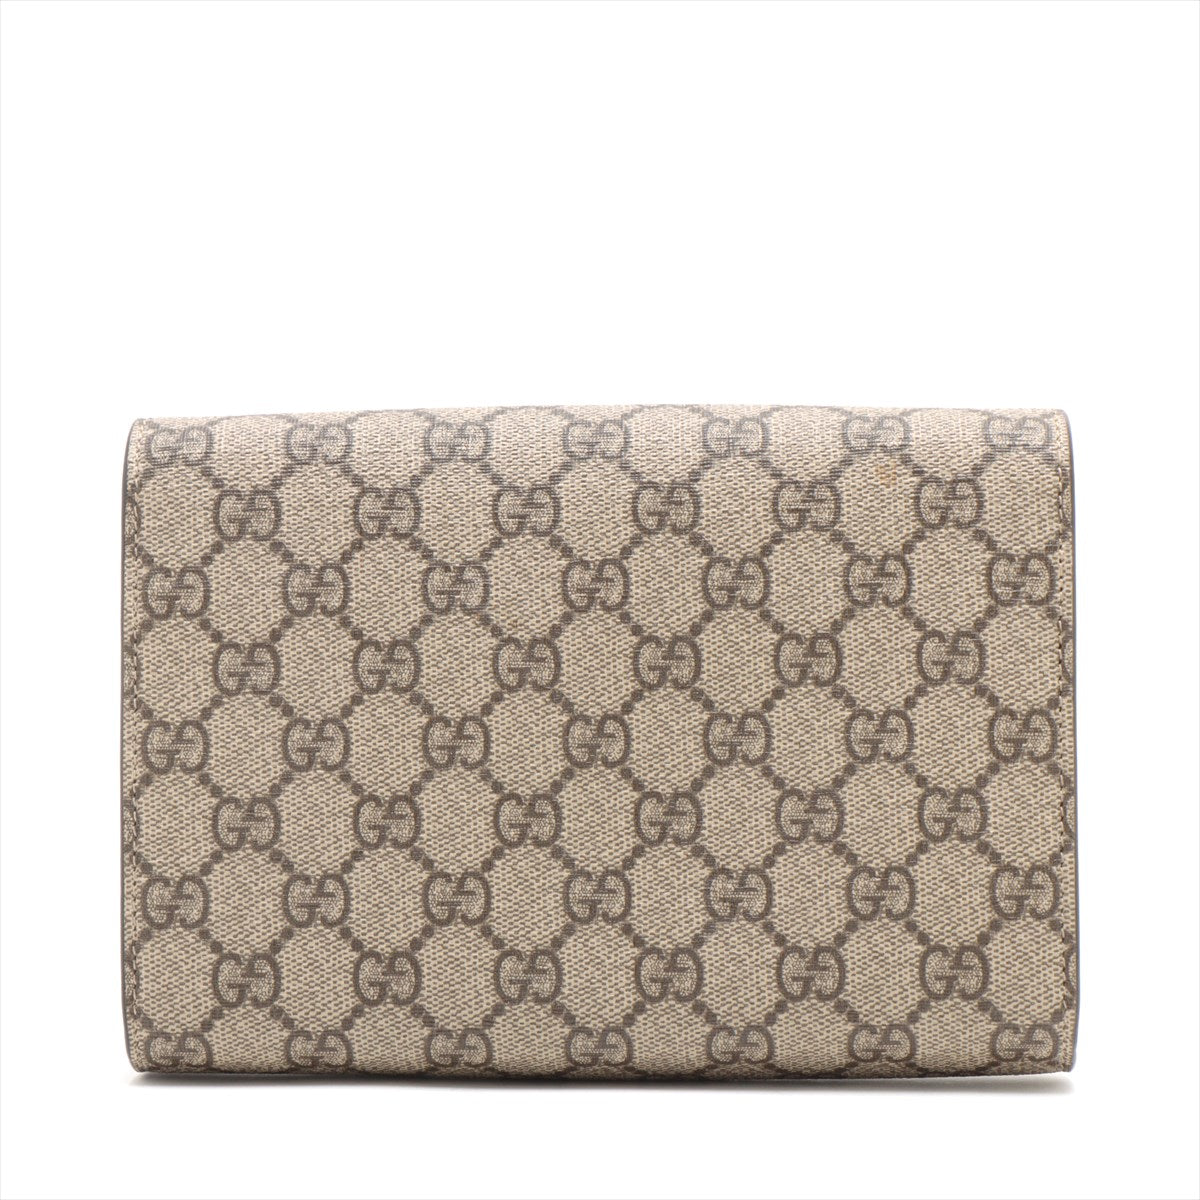 Gucci GG Supreme Dionysus PVC & leather Chain wallet Beige